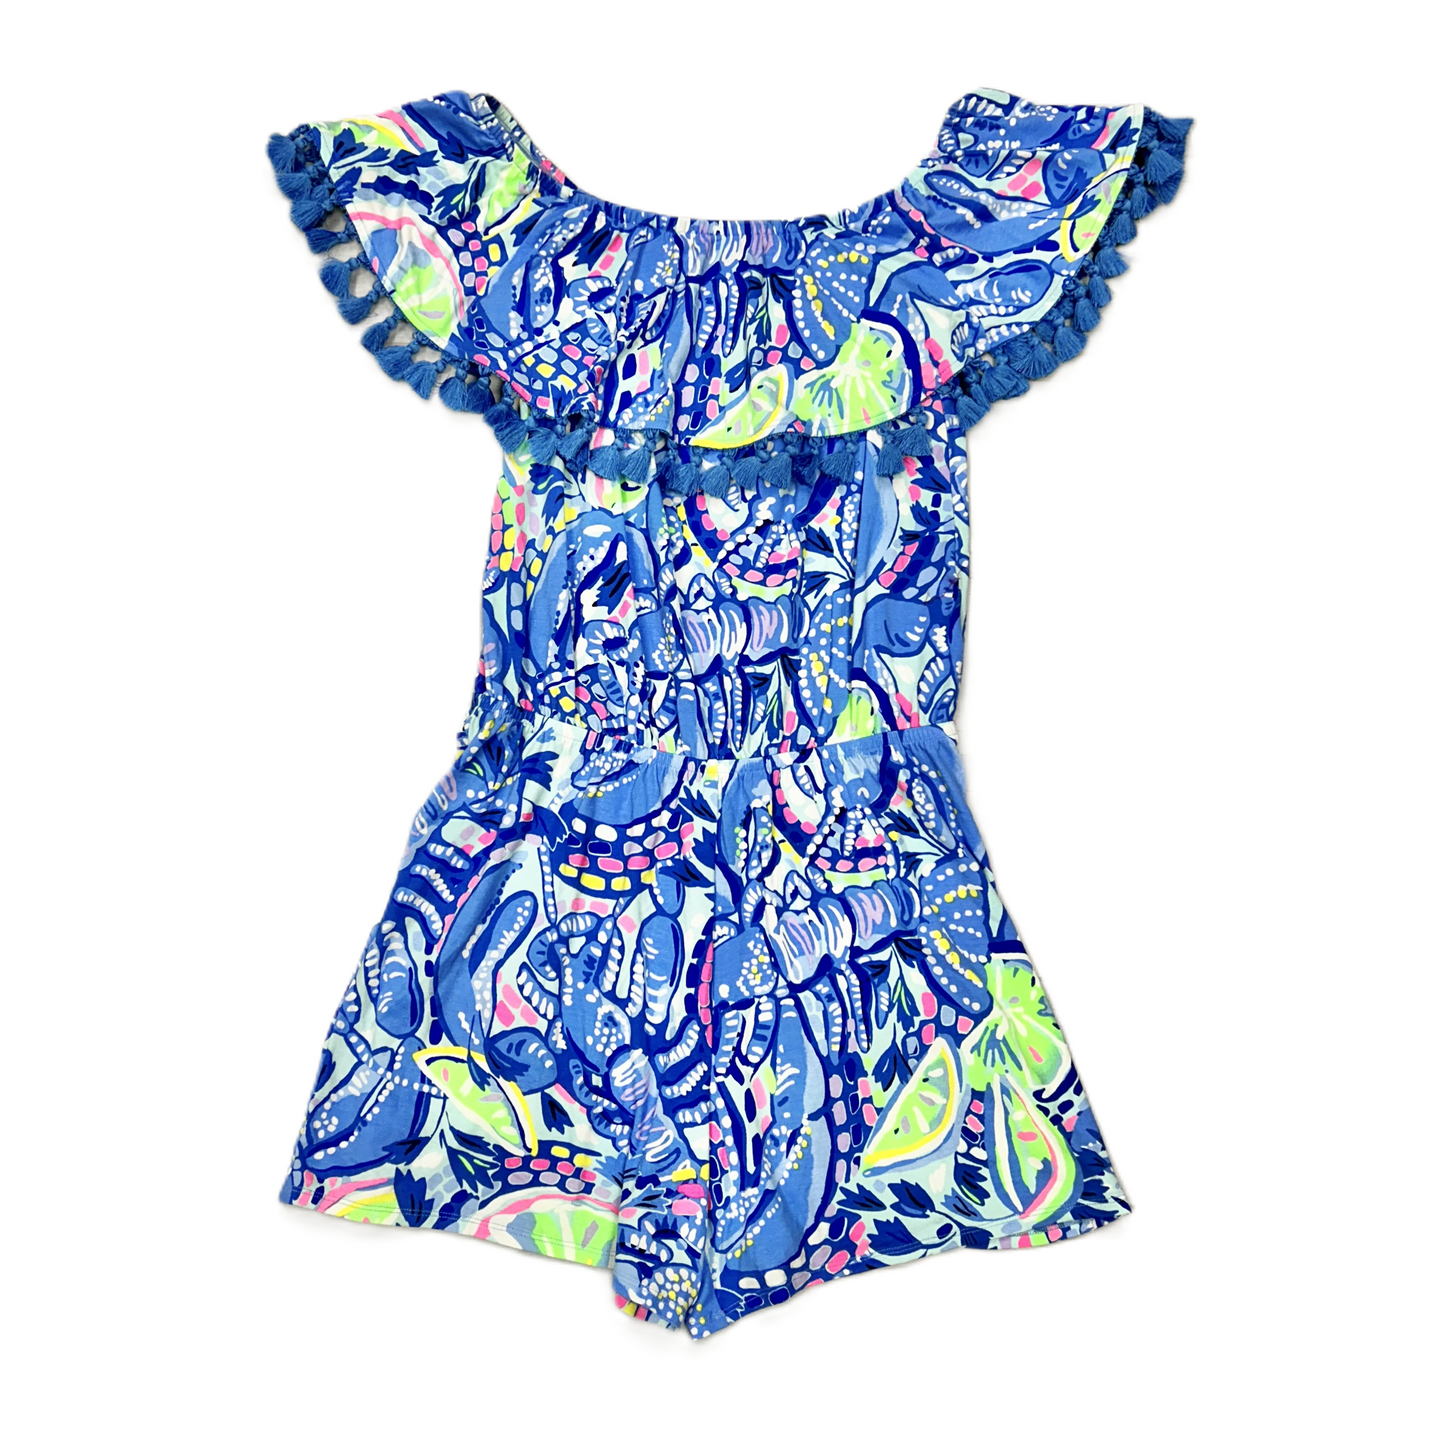 Blue & Pink Romper Designer By Lilly Pulitzer, Size: S